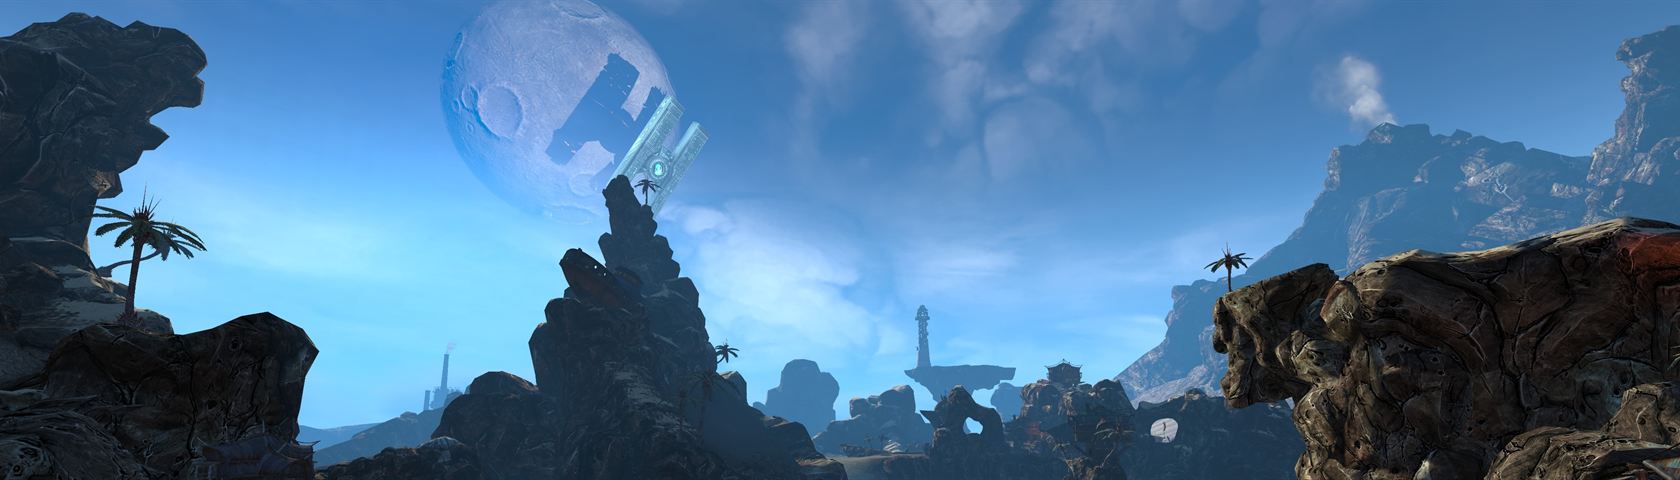 Borderlands 2: Hyperion Satellite as viewed from Oasis